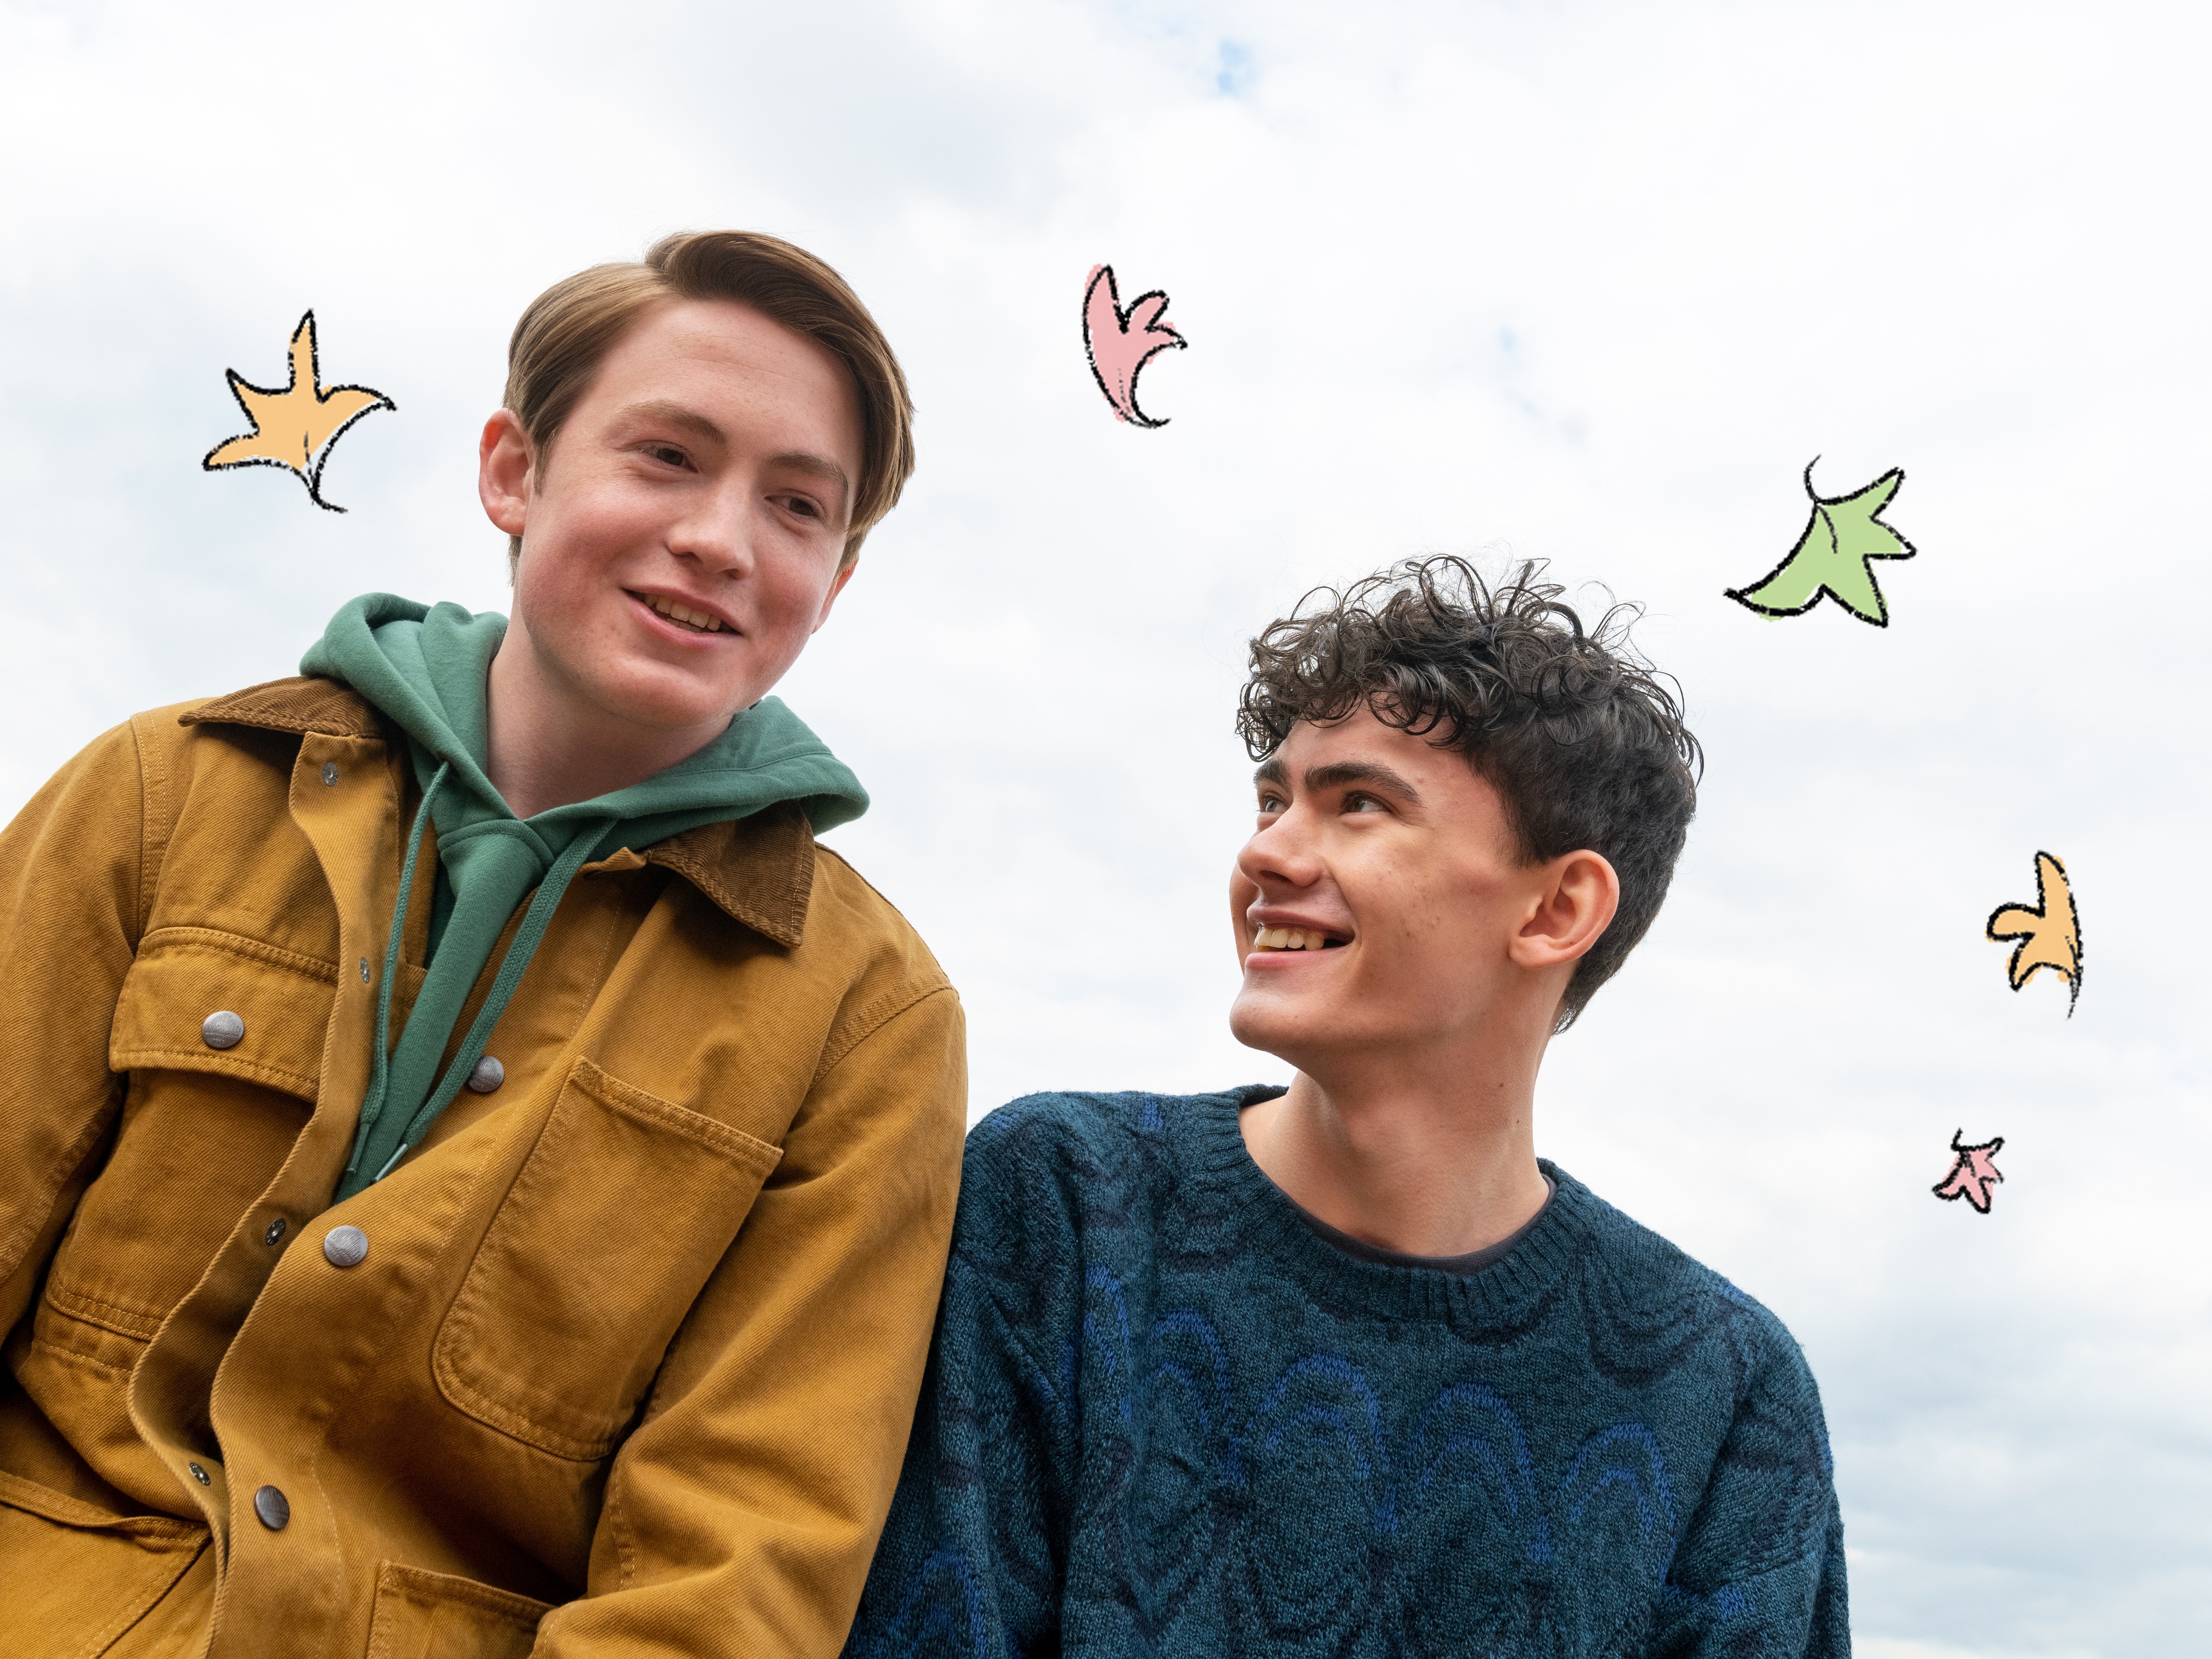 Netflix's “Heartstopper” Stars Want Everyone to See “How Amazing and Beautiful Queerness Is”